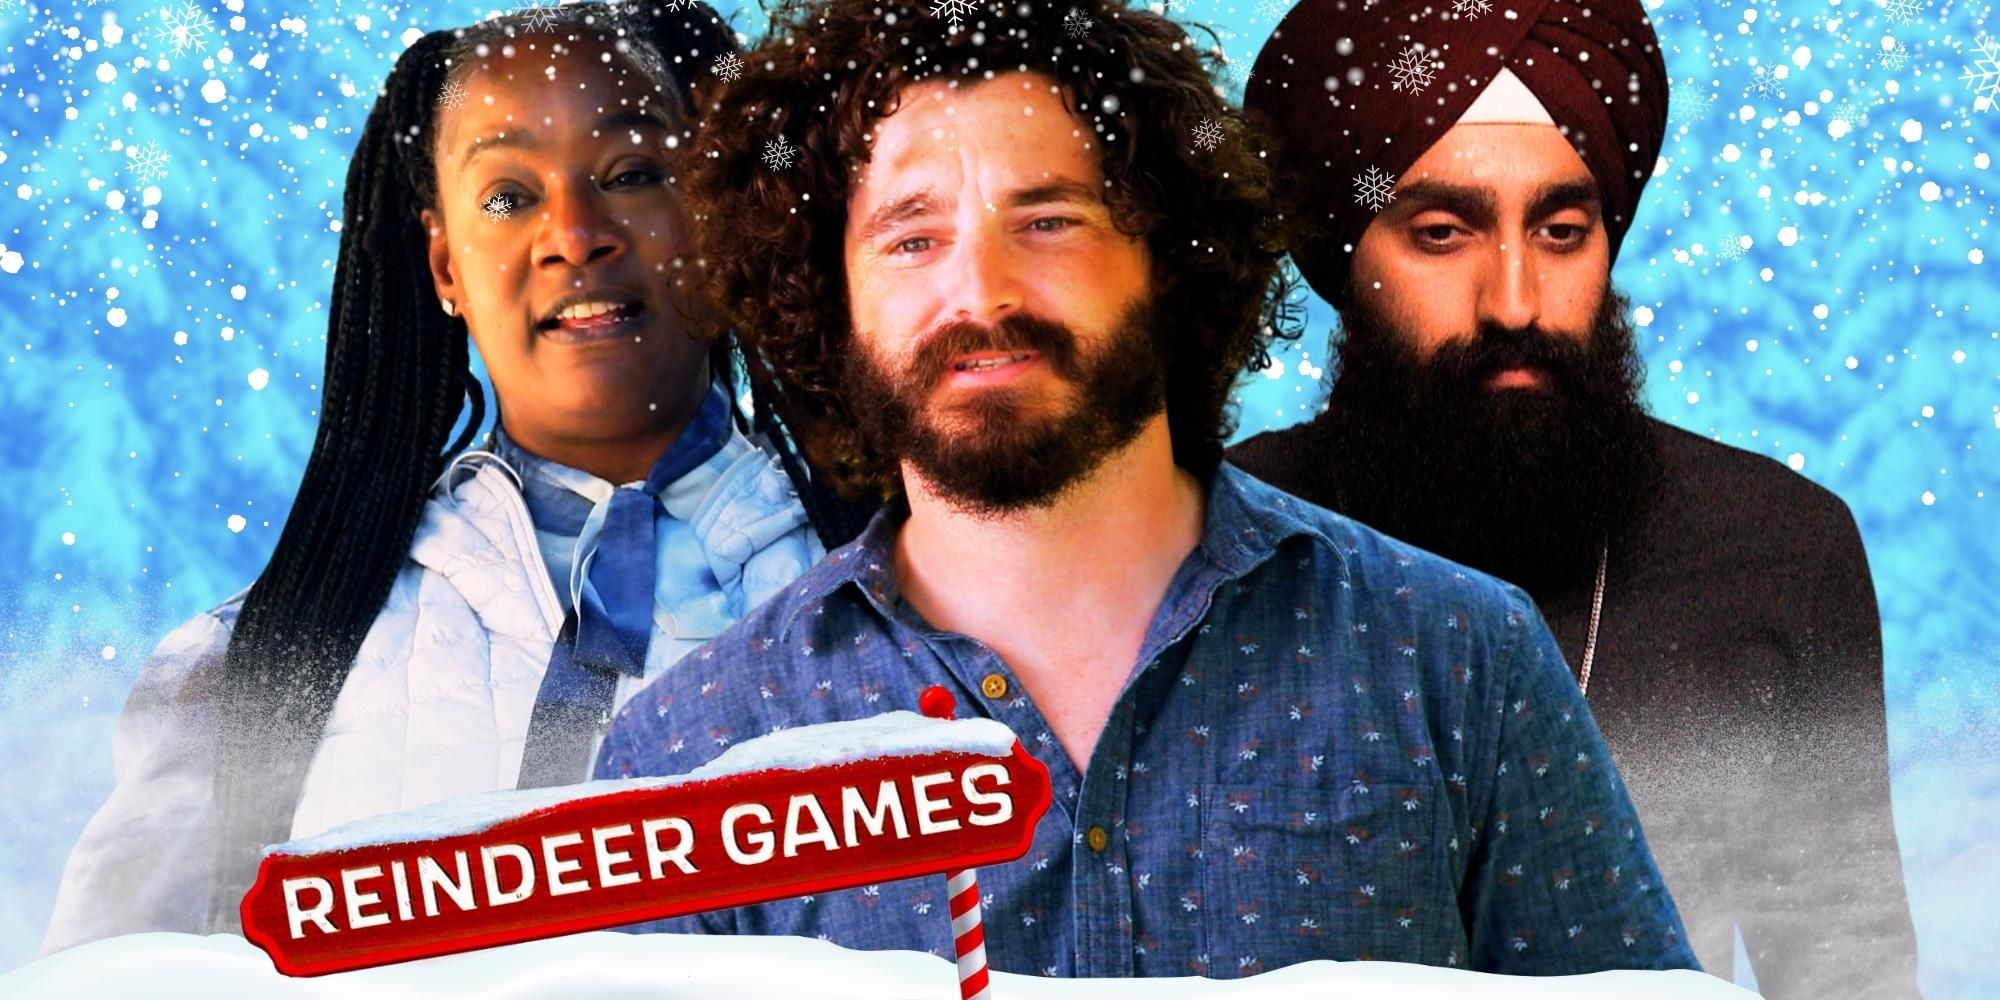 Big Brother 25 houseguests Cameron Hardin, Cirie Fields and Jag Bains, with Reindeer Games logo